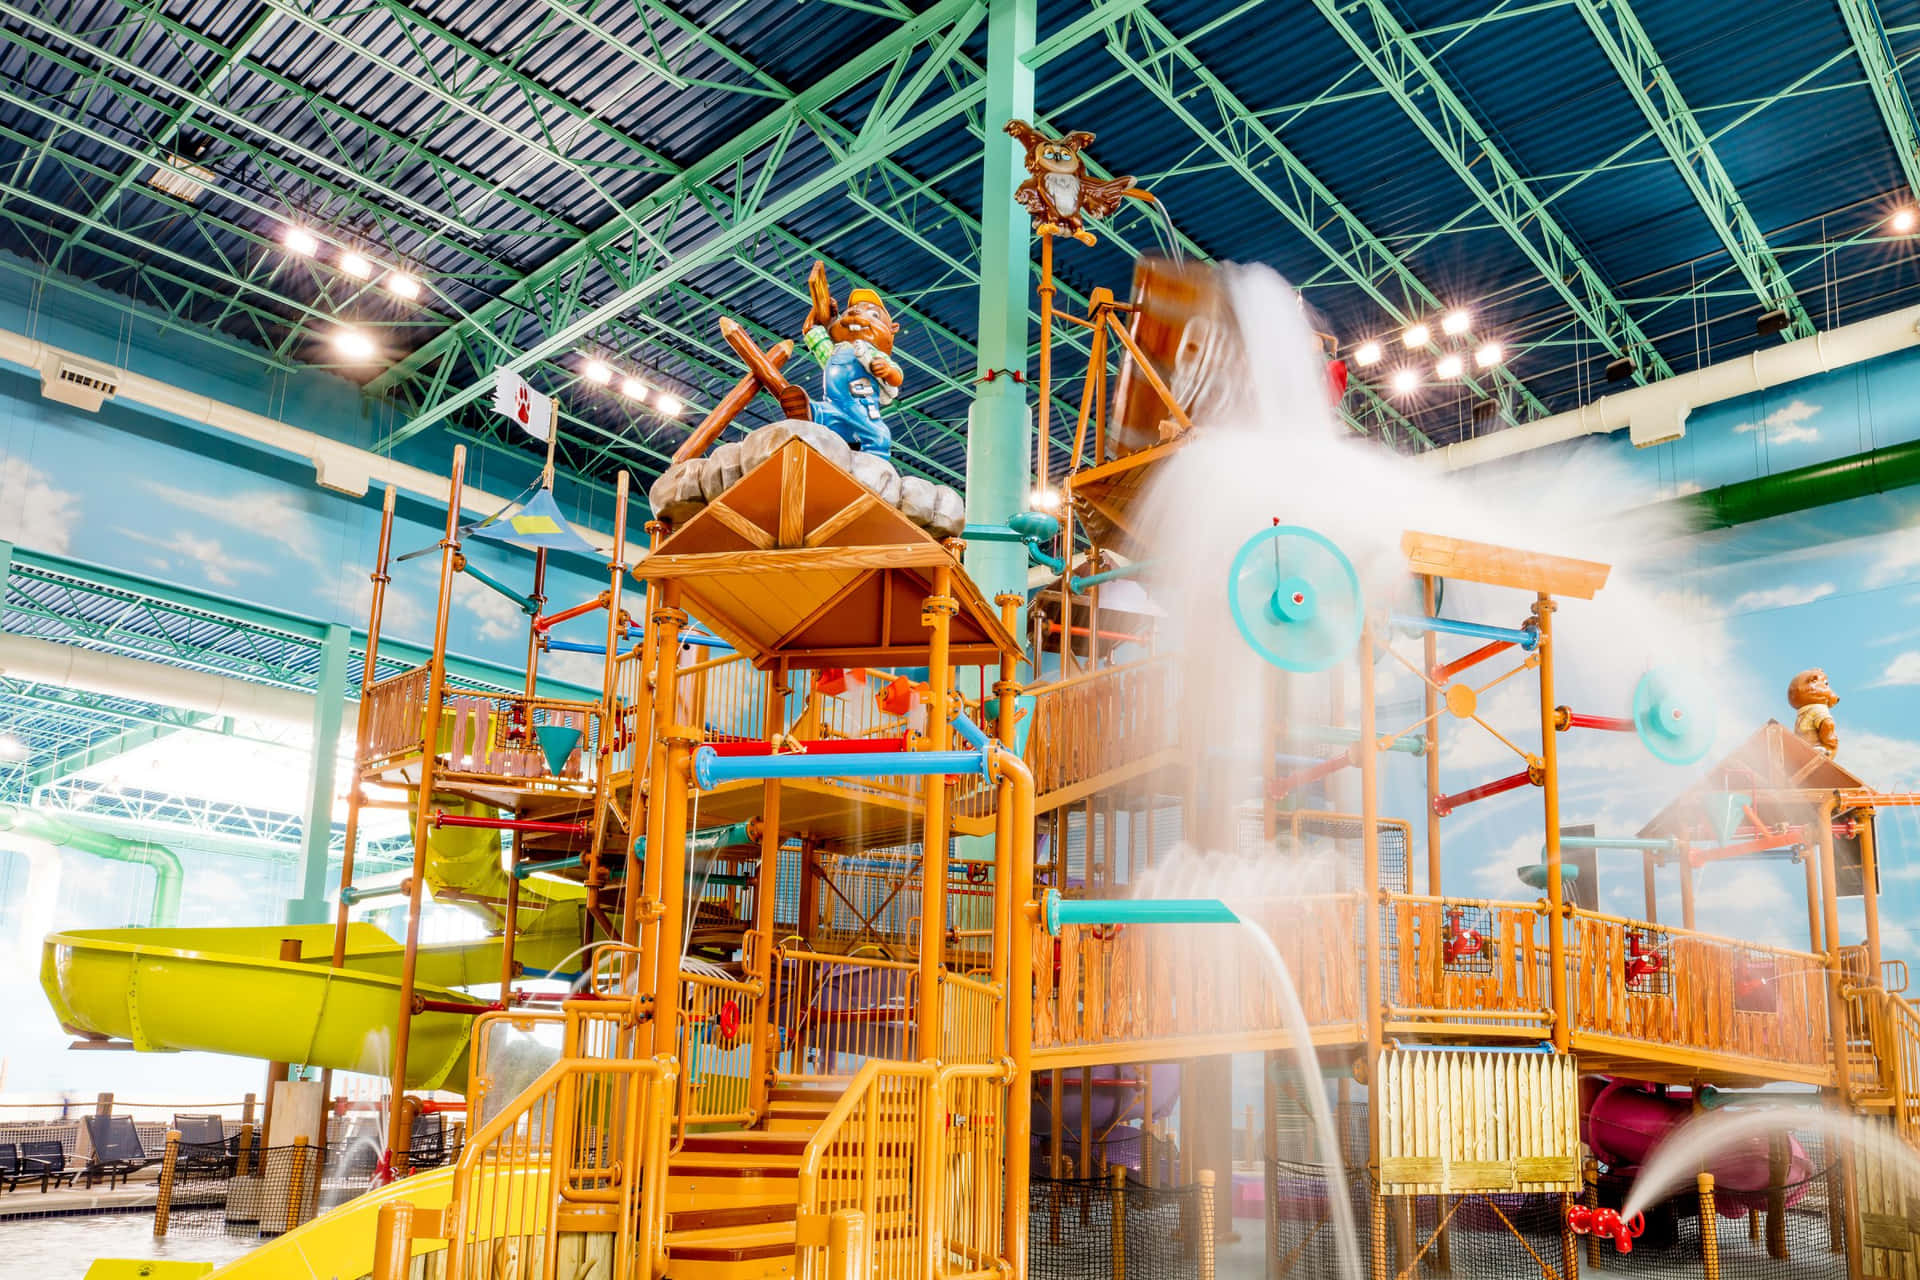 A Water Park With A Water Slide And Water Fountain